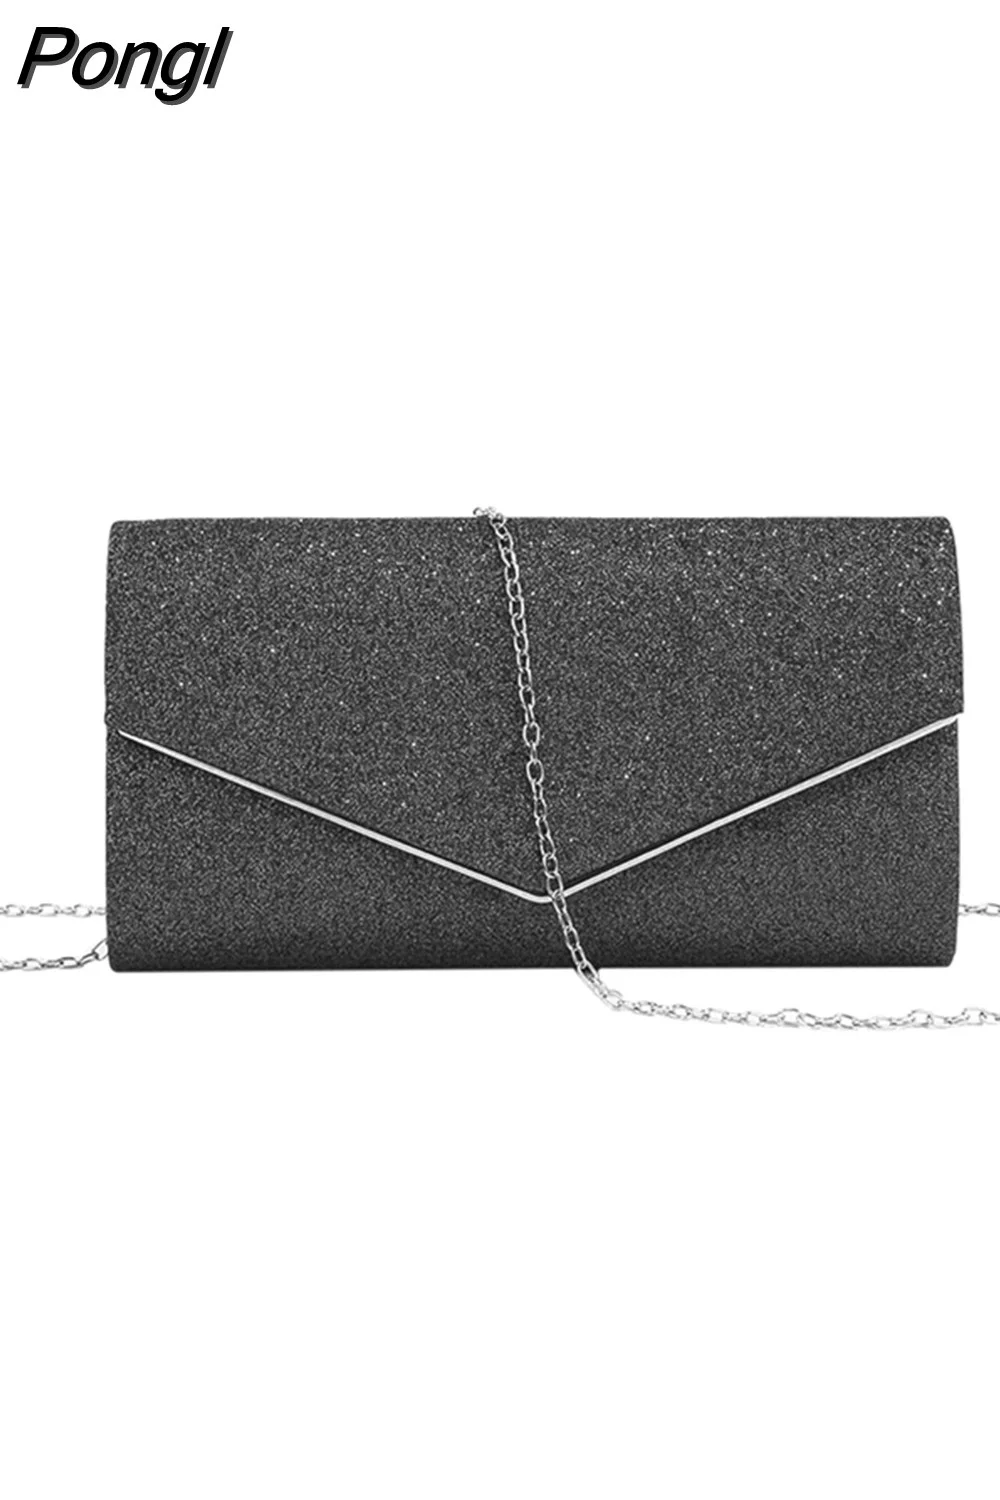 Pongl Square Women Shoulder Bags Fashion Sequin Female Daily Clutch Wedding Party Bling Chain Crossbody Bags Evening Handbags